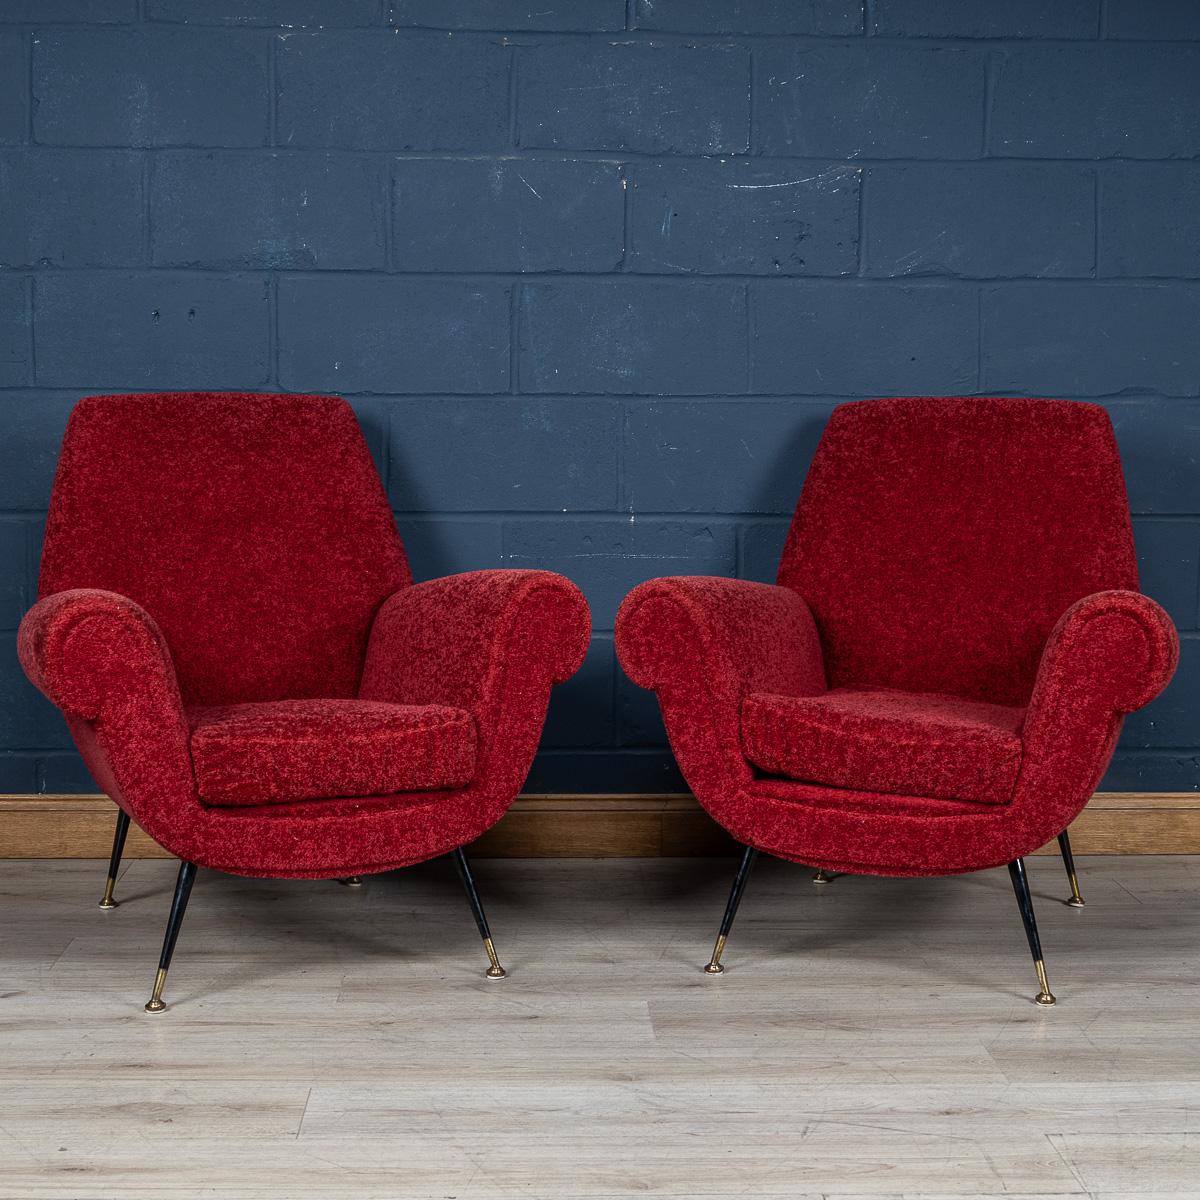 A lovely pair of armchairs made in Italy in the middle part of the 20th century. Upholstered in a luxurious crimson boucle' fabric, the armchairs embody a striking mid-century design characterised by sharp angles, tapered legs, and brass tips,